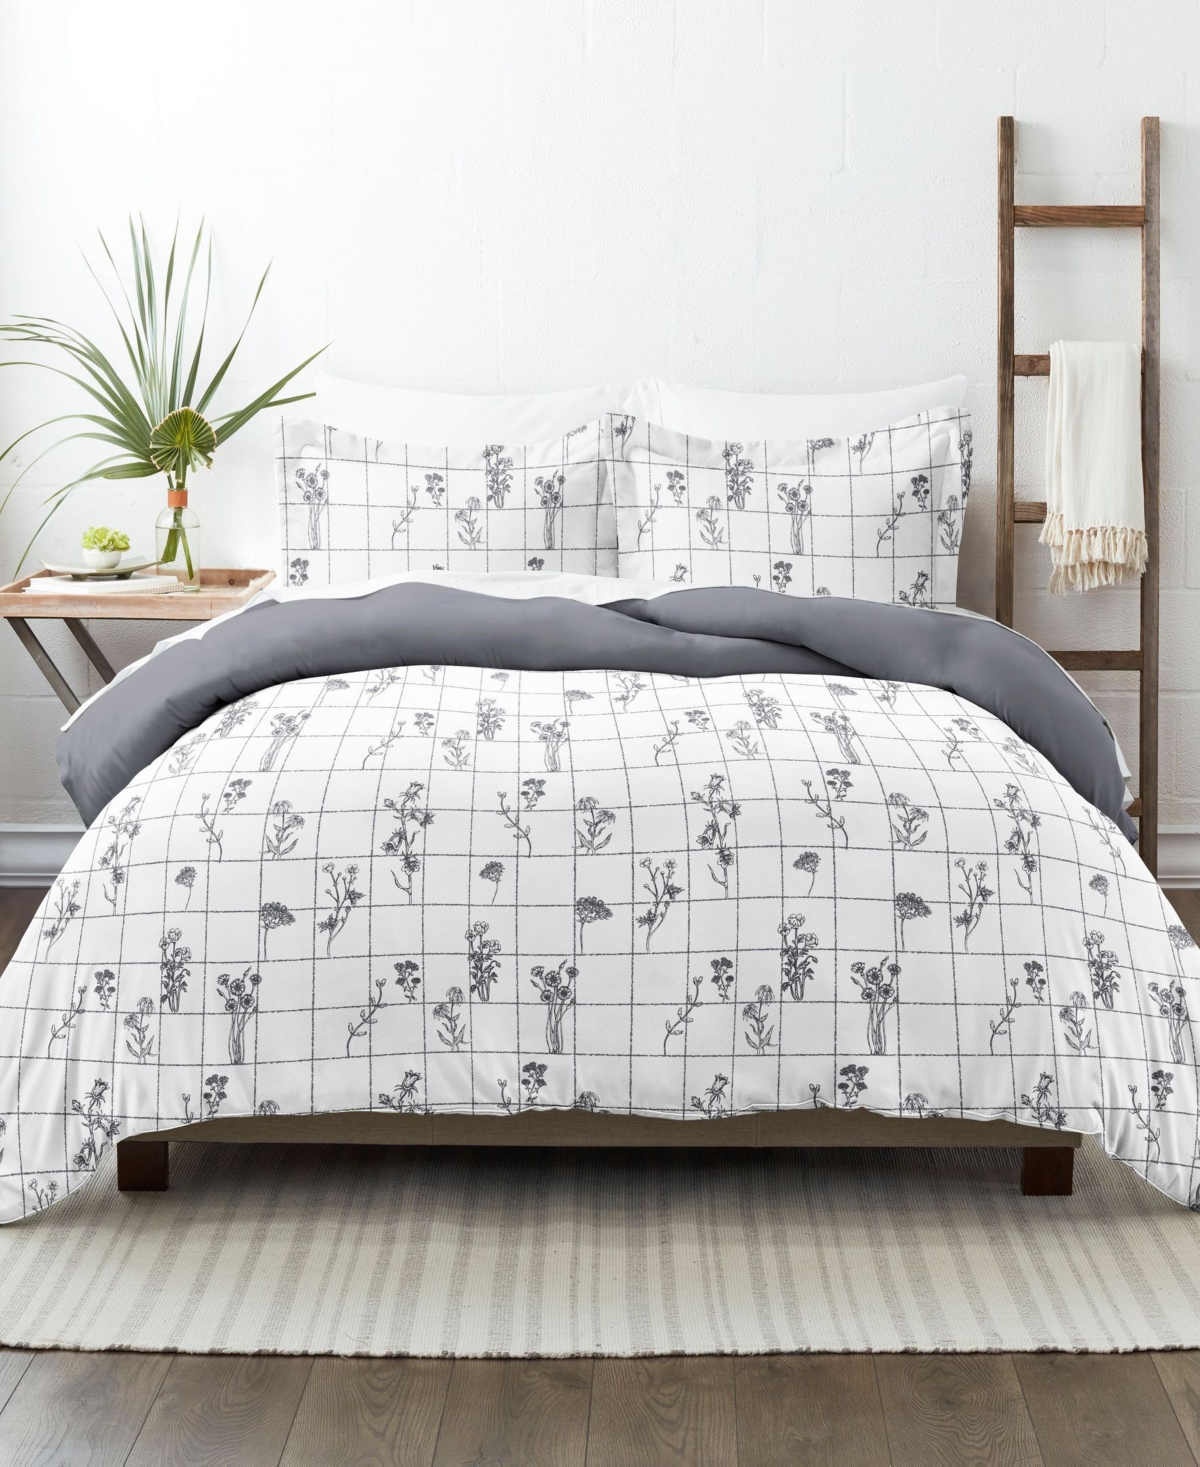 Ienjoy Home Home Collection Premium Ultra Soft 3 Piece Reversible Duvet Cover Set, King/california King In Gray Flower Field